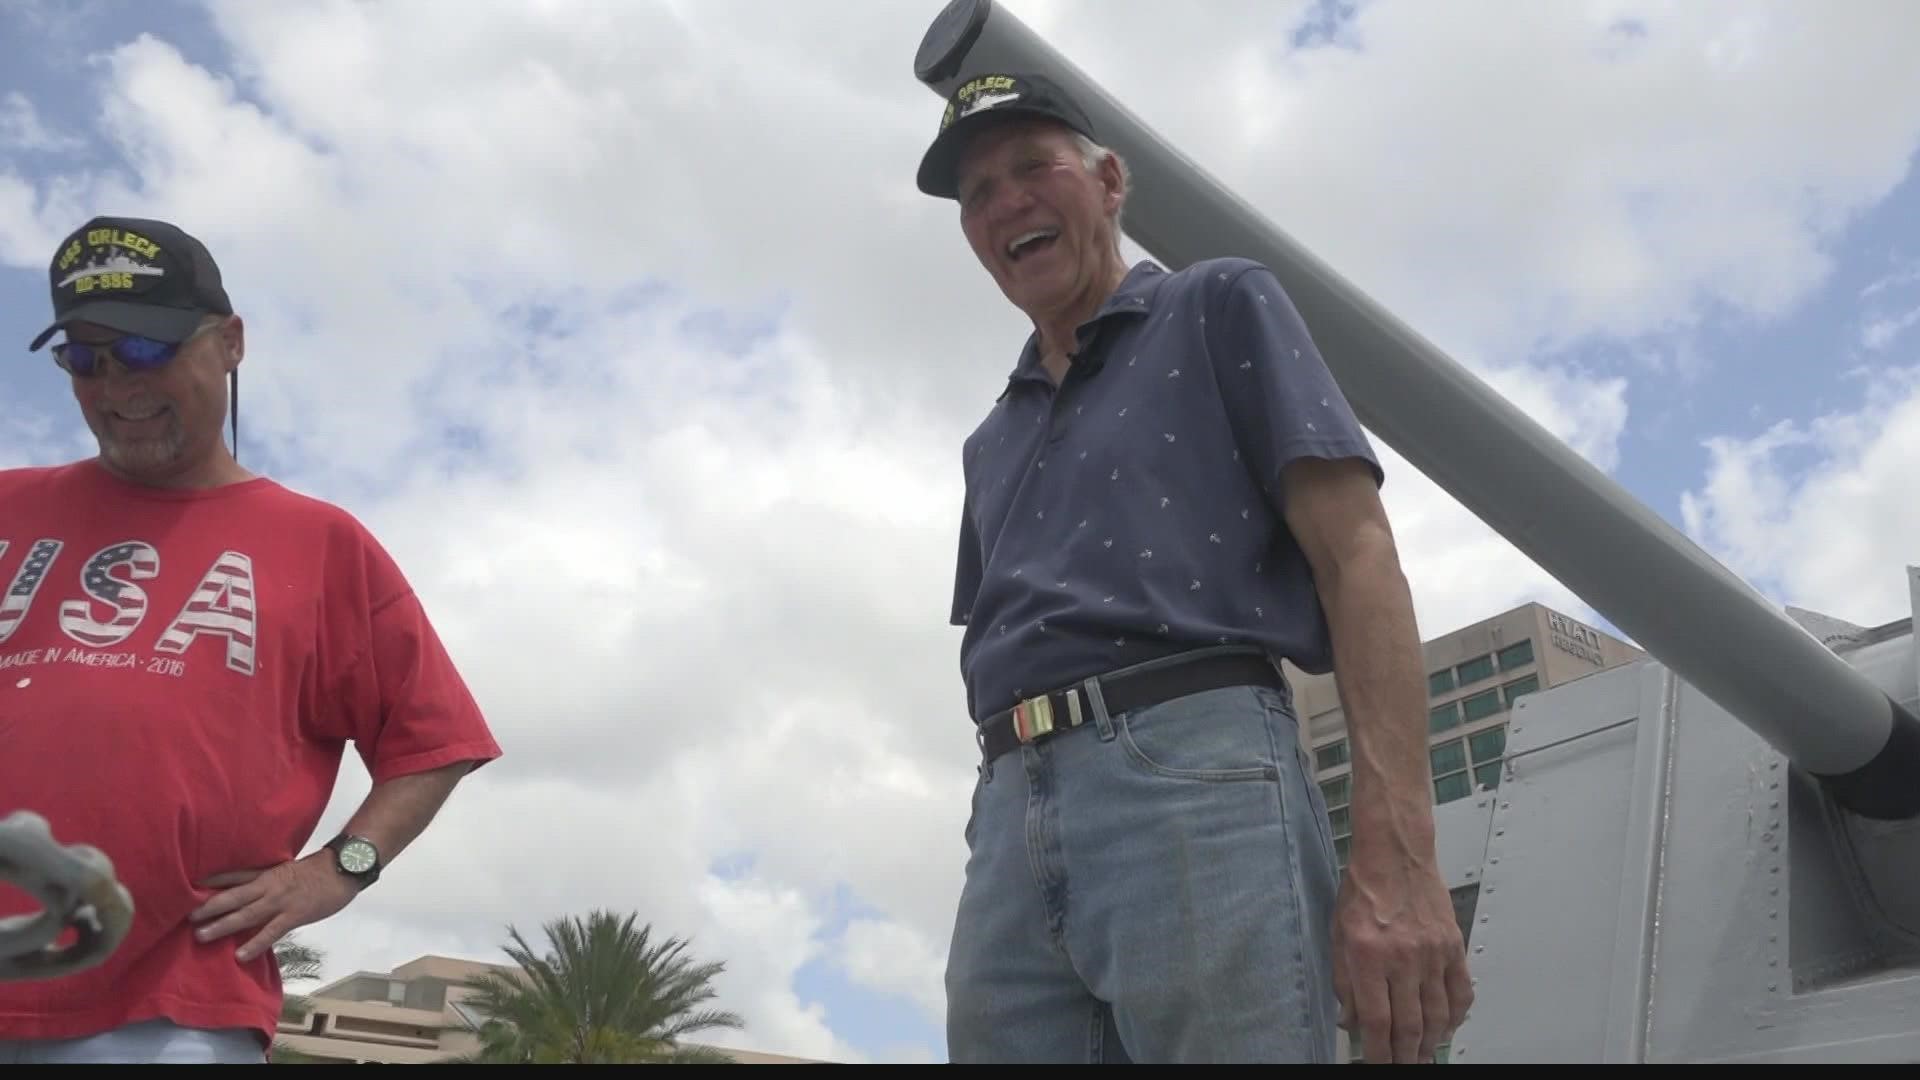 A former ship superintendent of the USS Orleck is in Jacksonville, helping to make repairs to the Destroyer so it can become a museum ship.